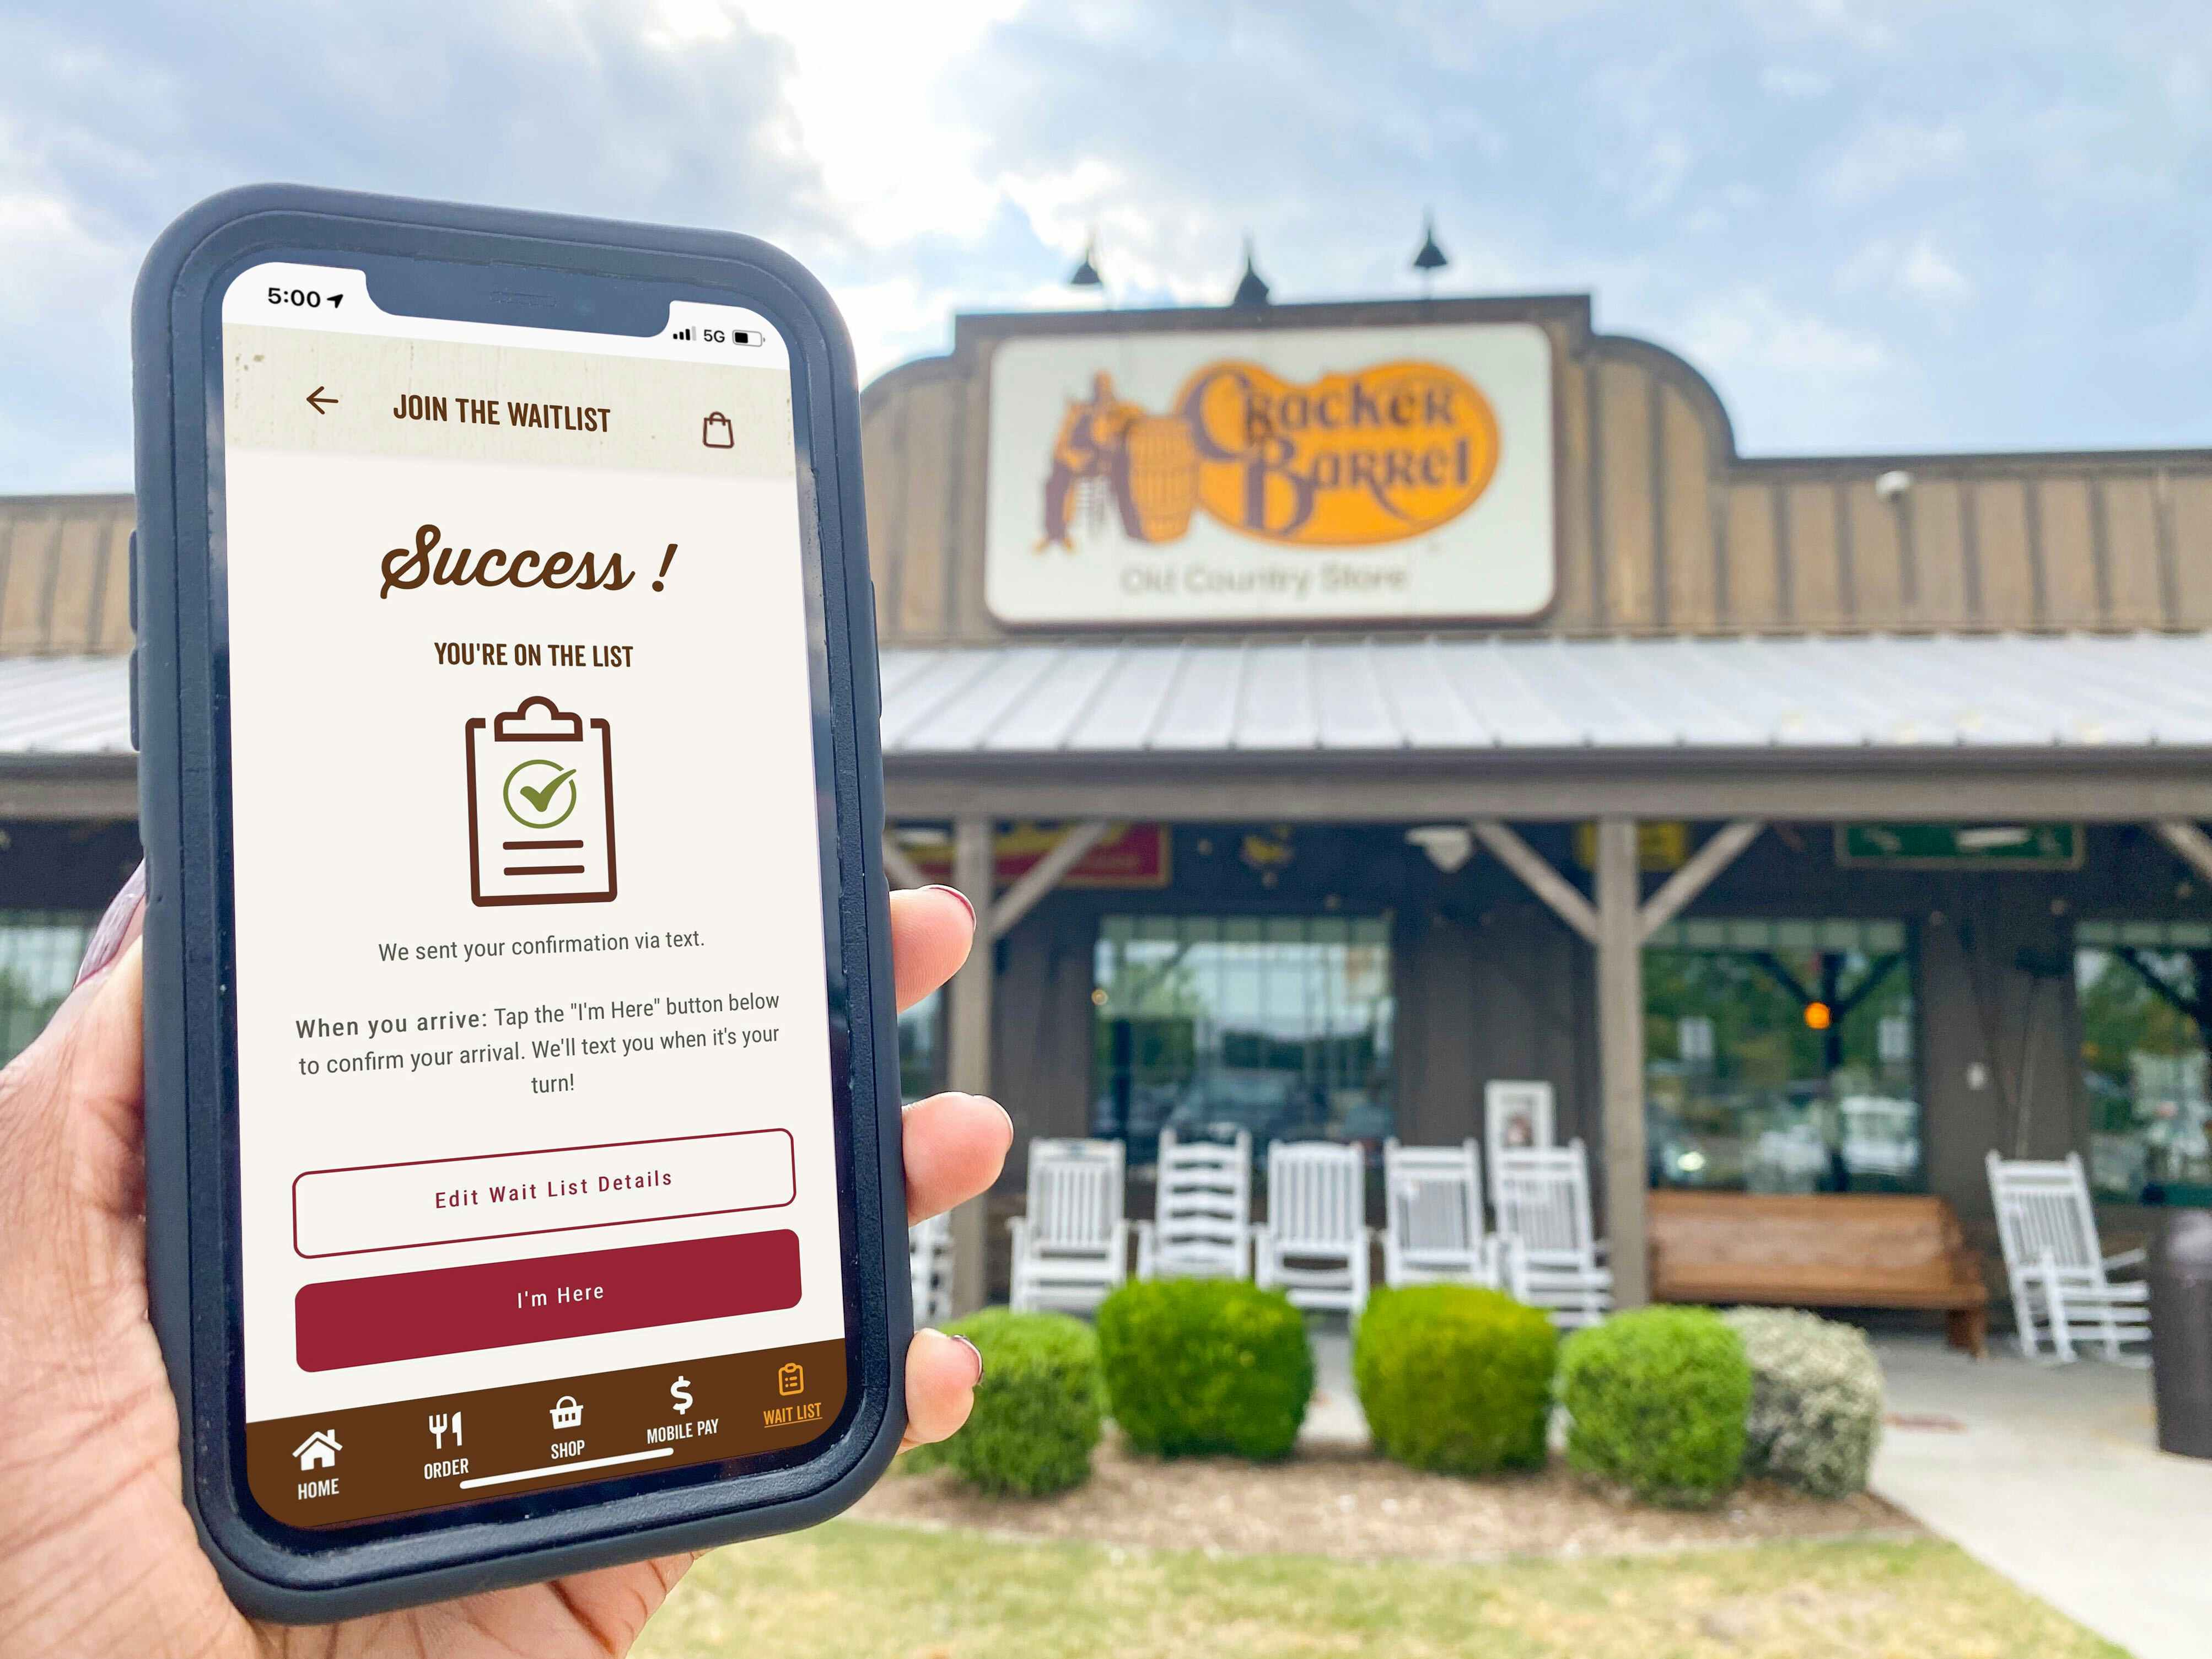 A person holding a cell phone in front of a Cracker Barrel restaurant. The waitlist section of the Cracker Barrel app is visible on the cell phone screen.